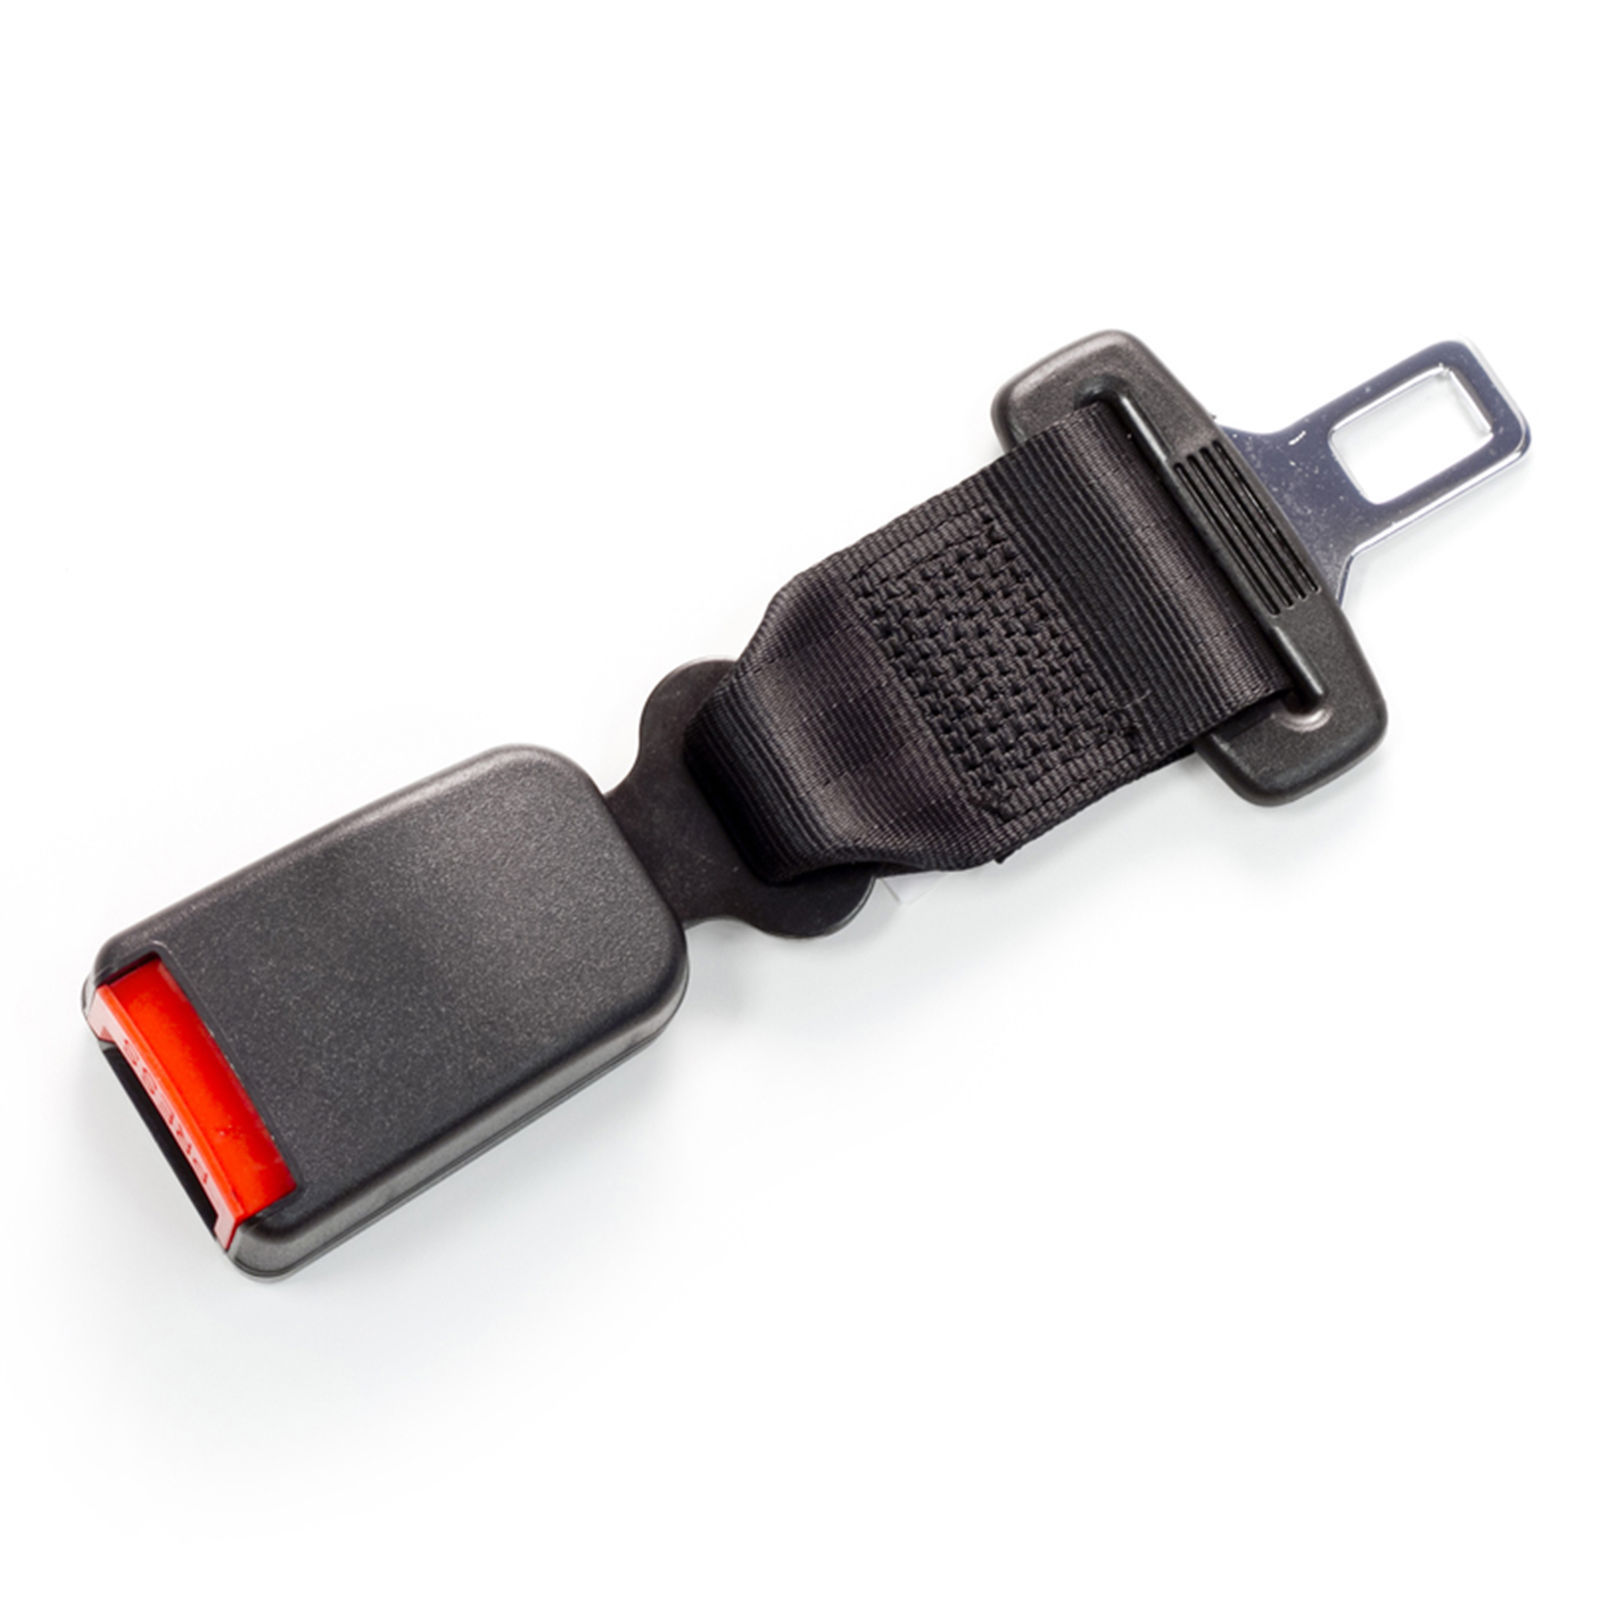 Seat Belt Extension for 2010 Honda CR-V 2nd Row Window Seats - $29.99